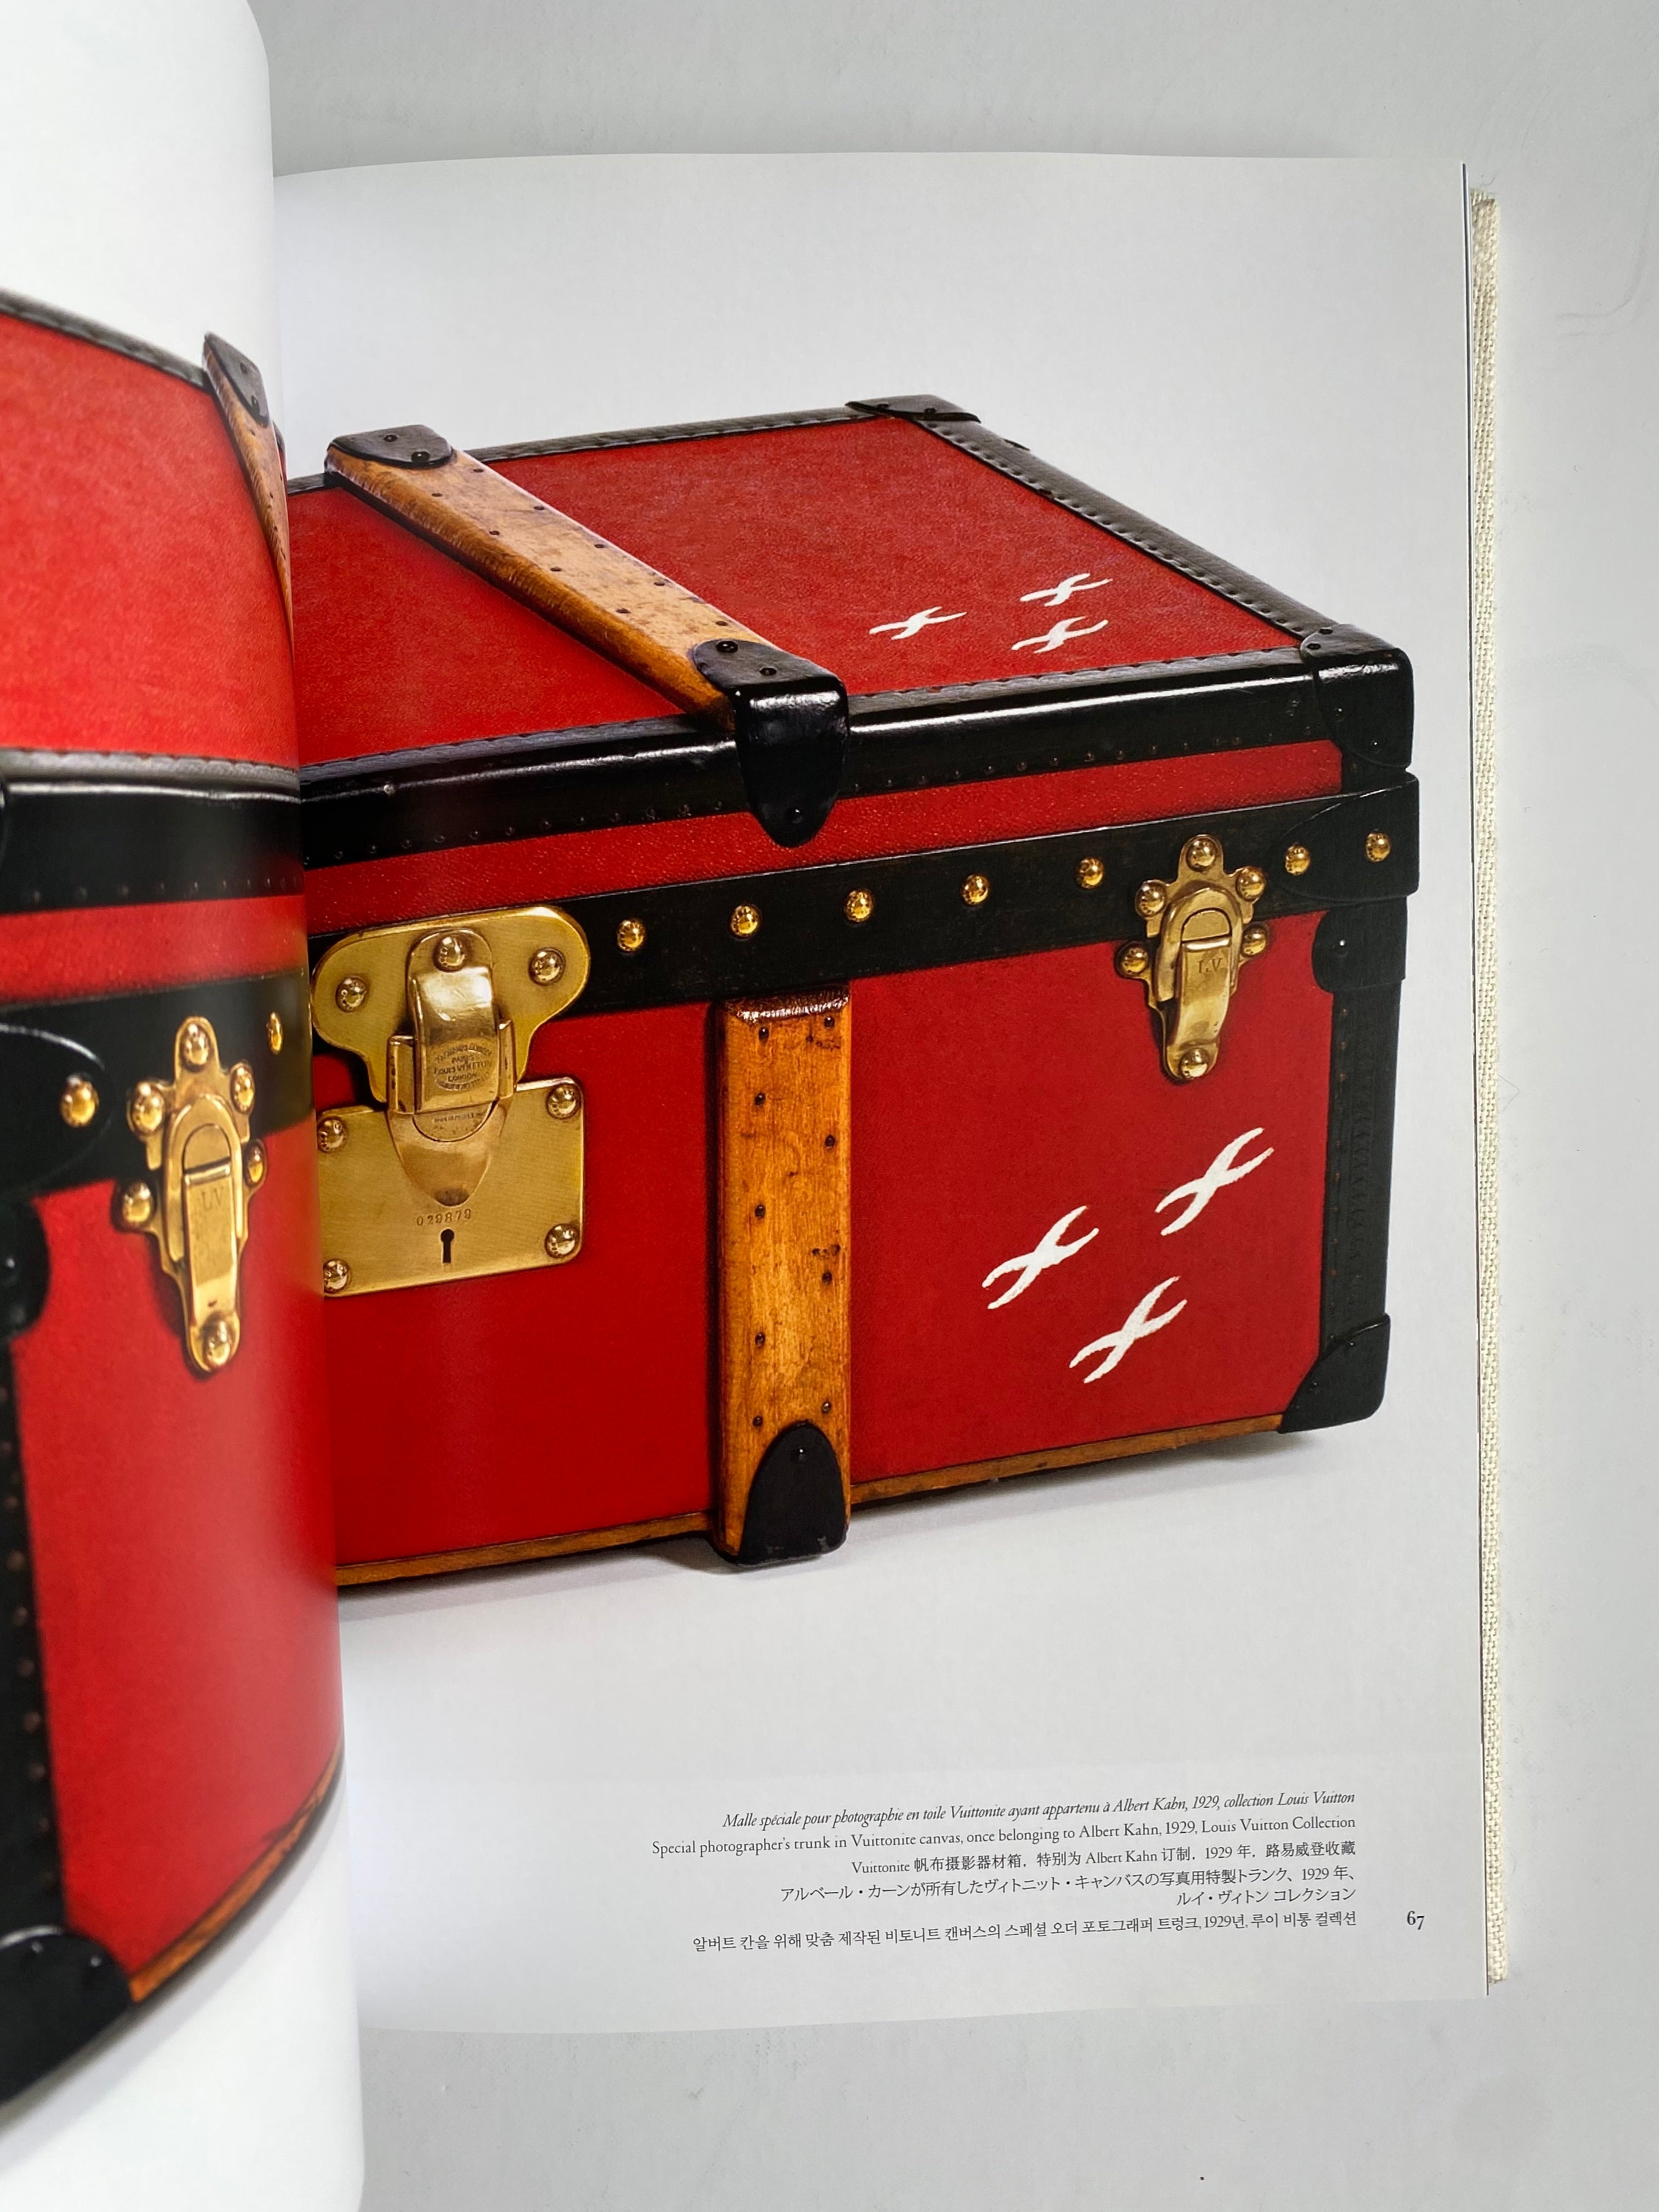 Louis Vuitton | Sail, Fly, Travel | From Assouline